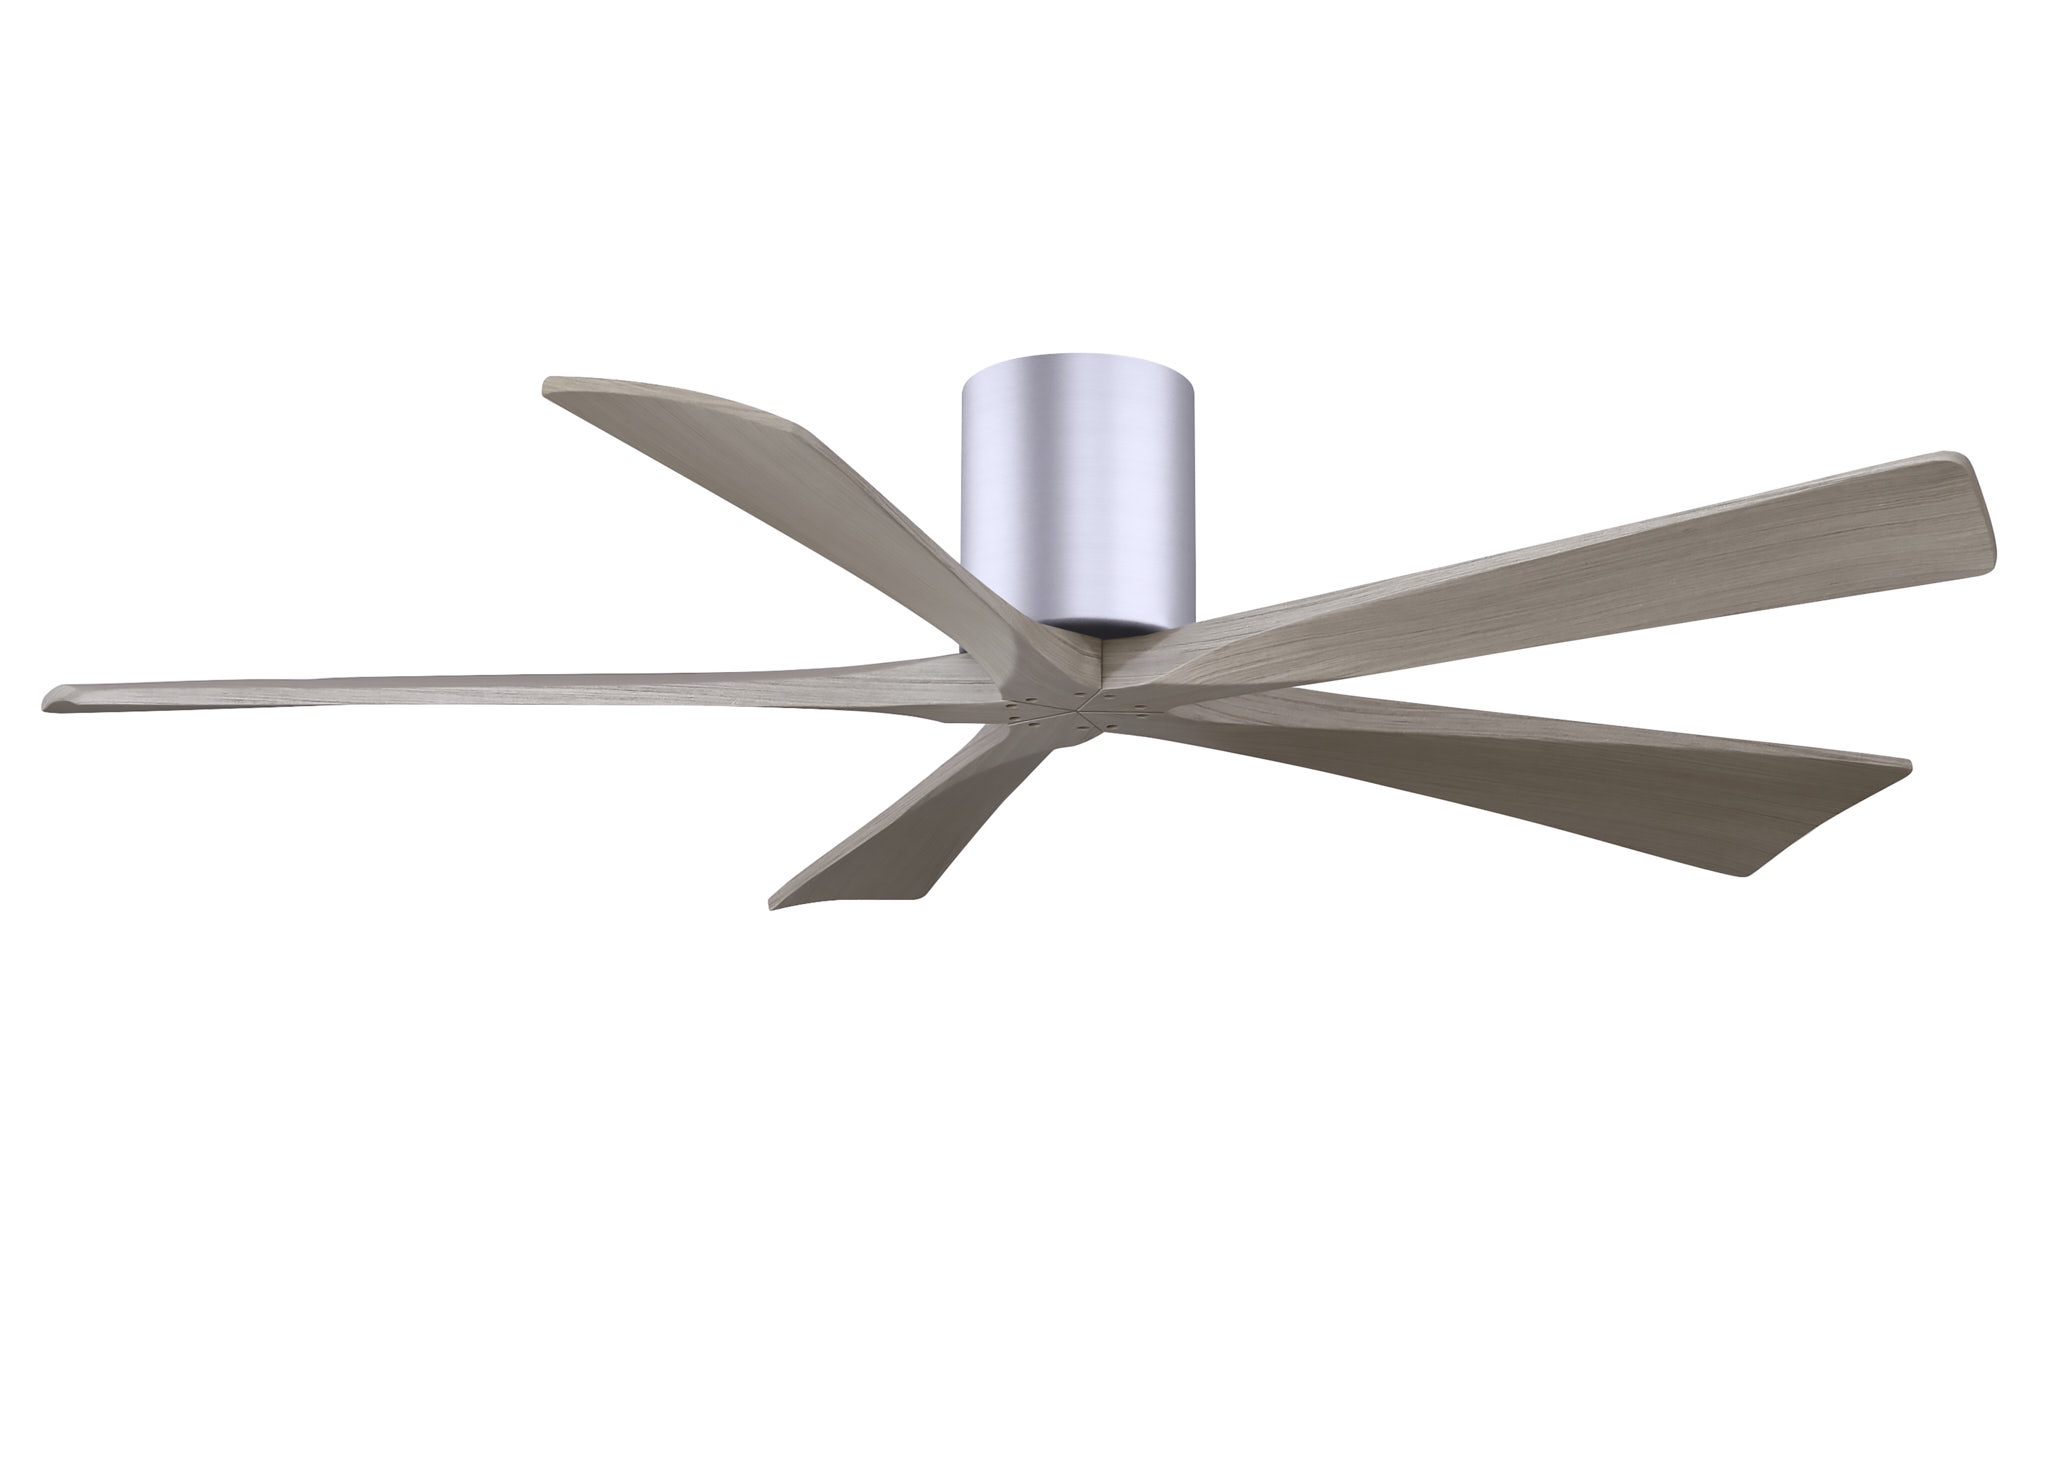 Irene-5H 6-speed ceiling fan in brushed nickel finish with 60